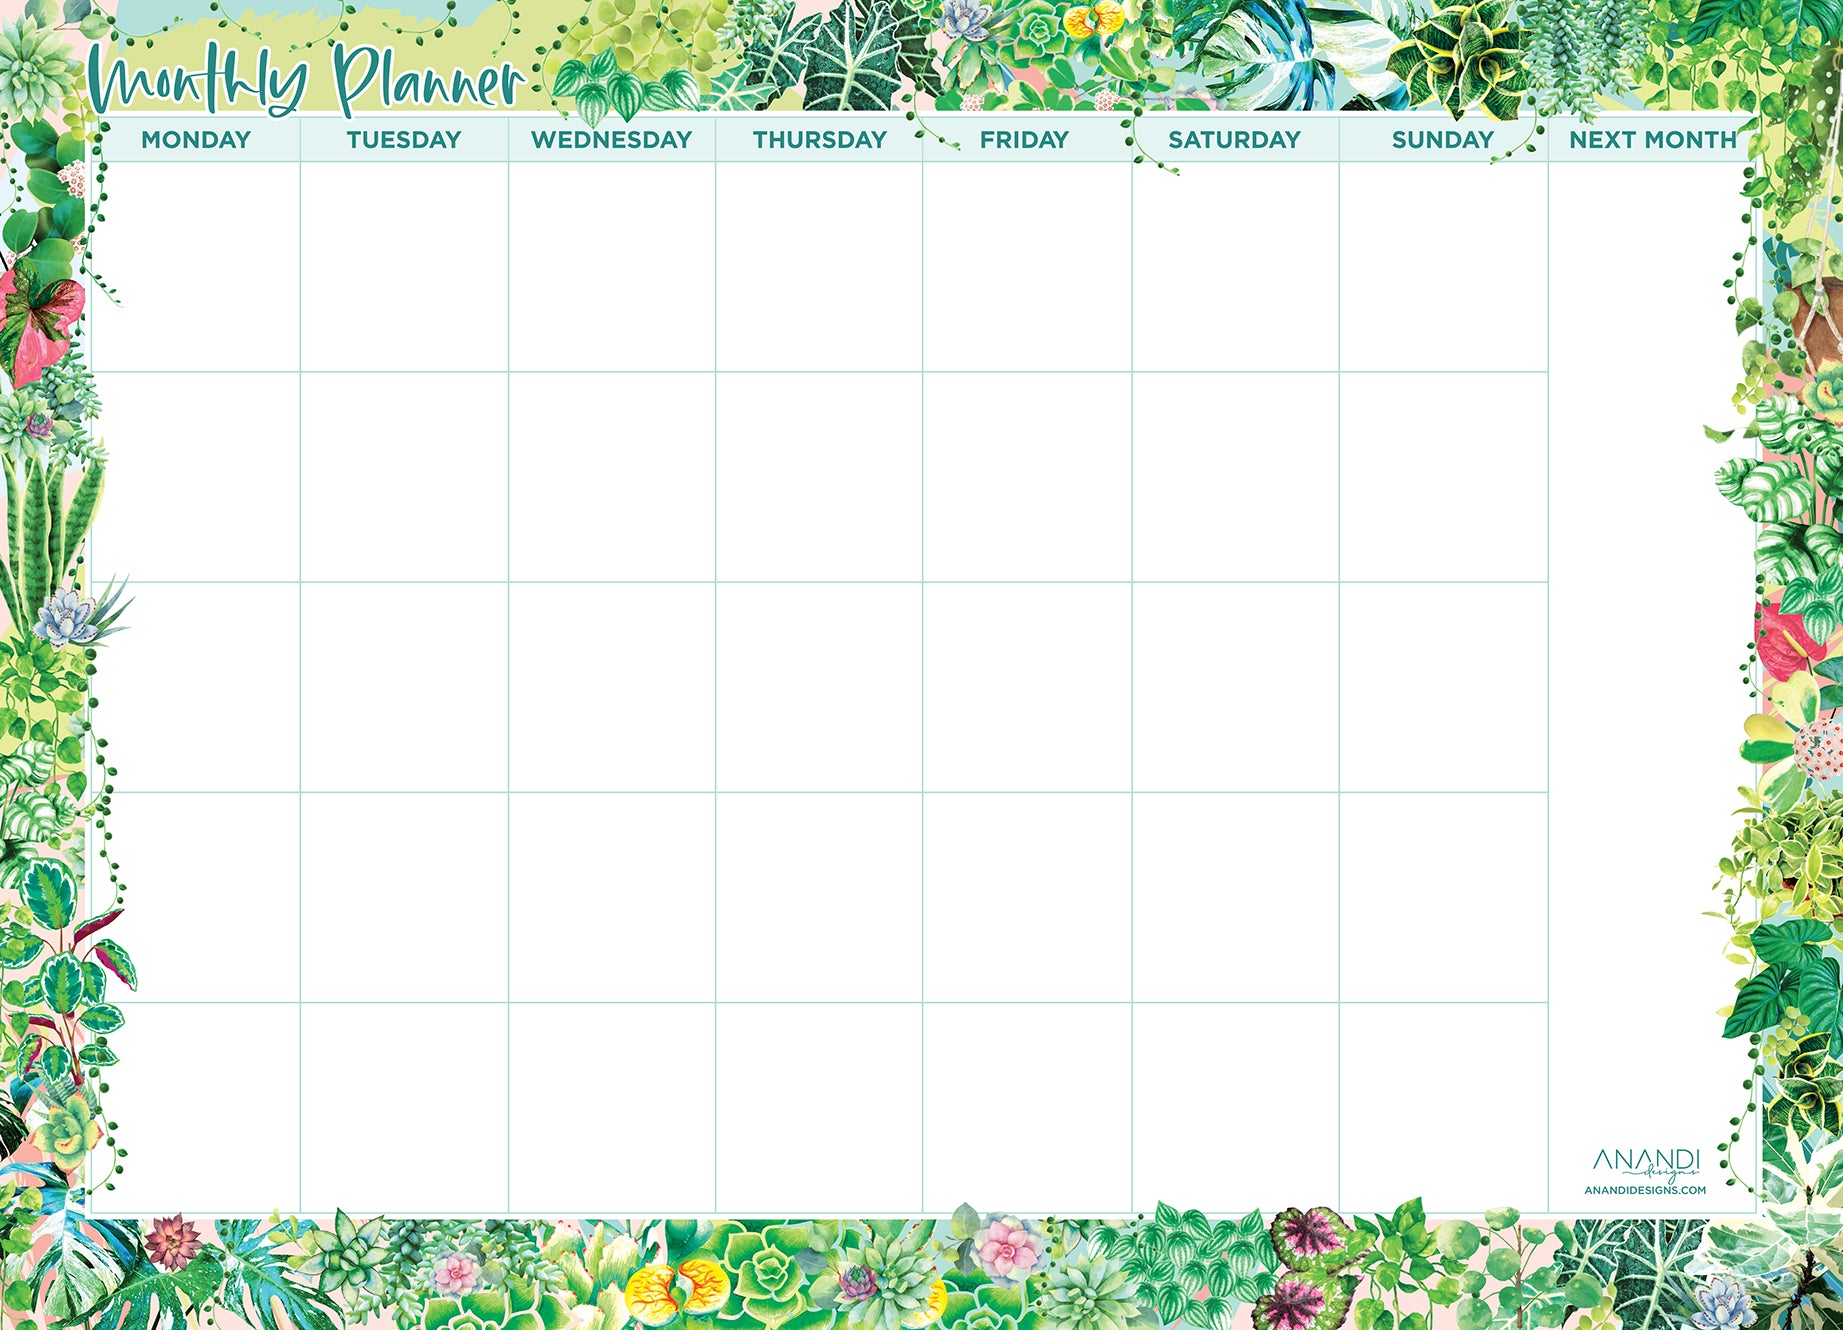 Magnetic Monthly Planner - Plant Lover (LARGE 43cm x 31cm)